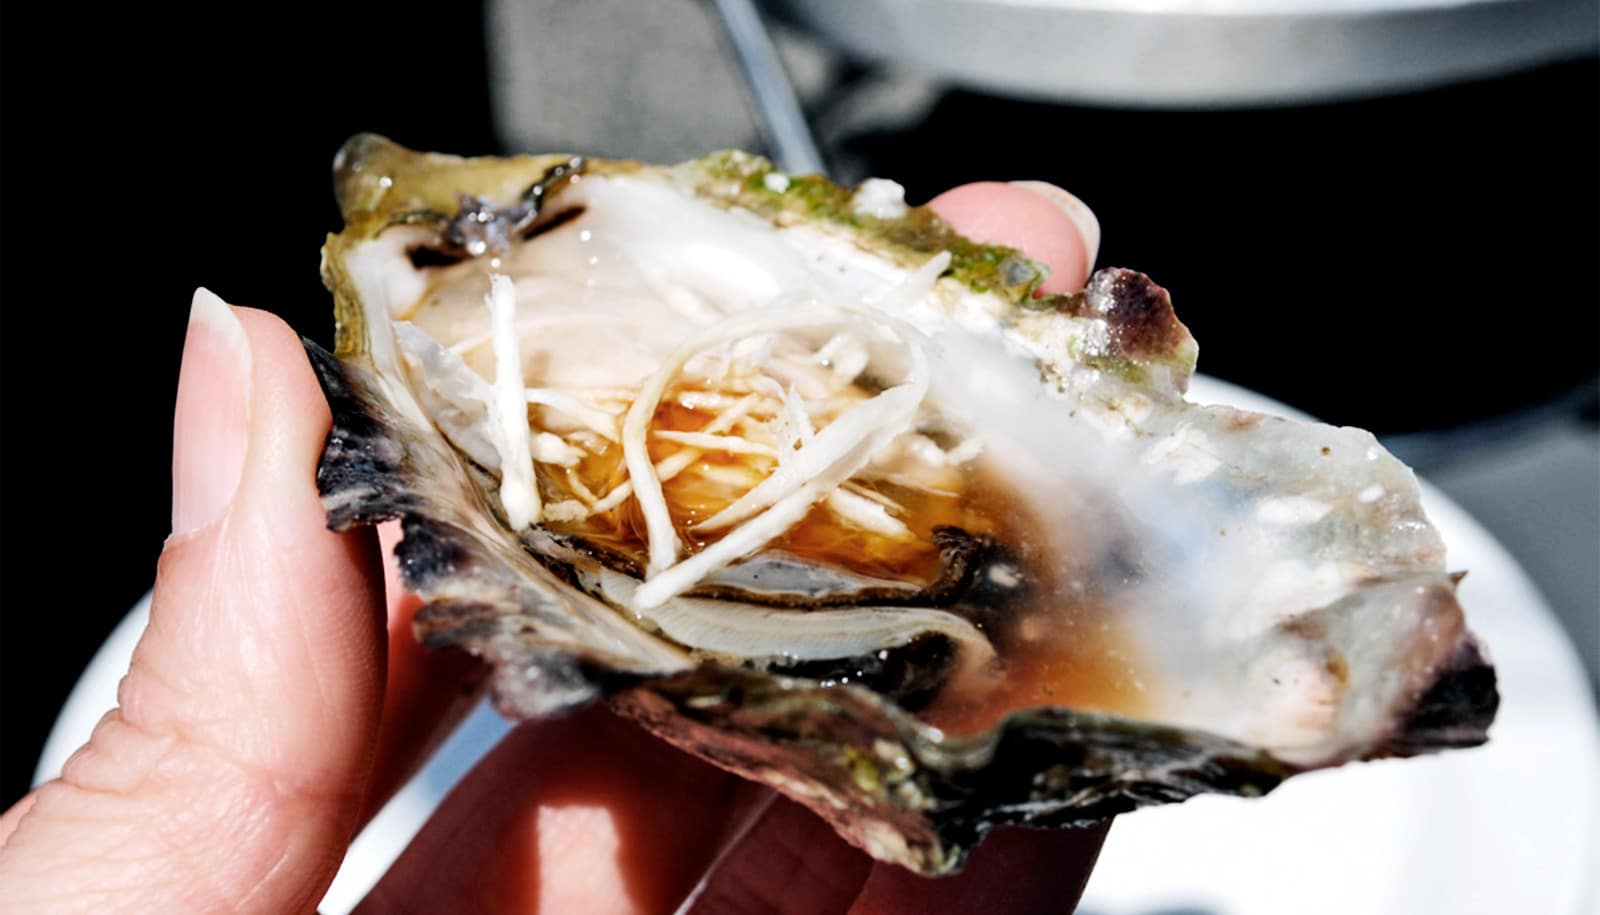 Eating oysters in 'R months' rule is 4,000 years old - Futurity